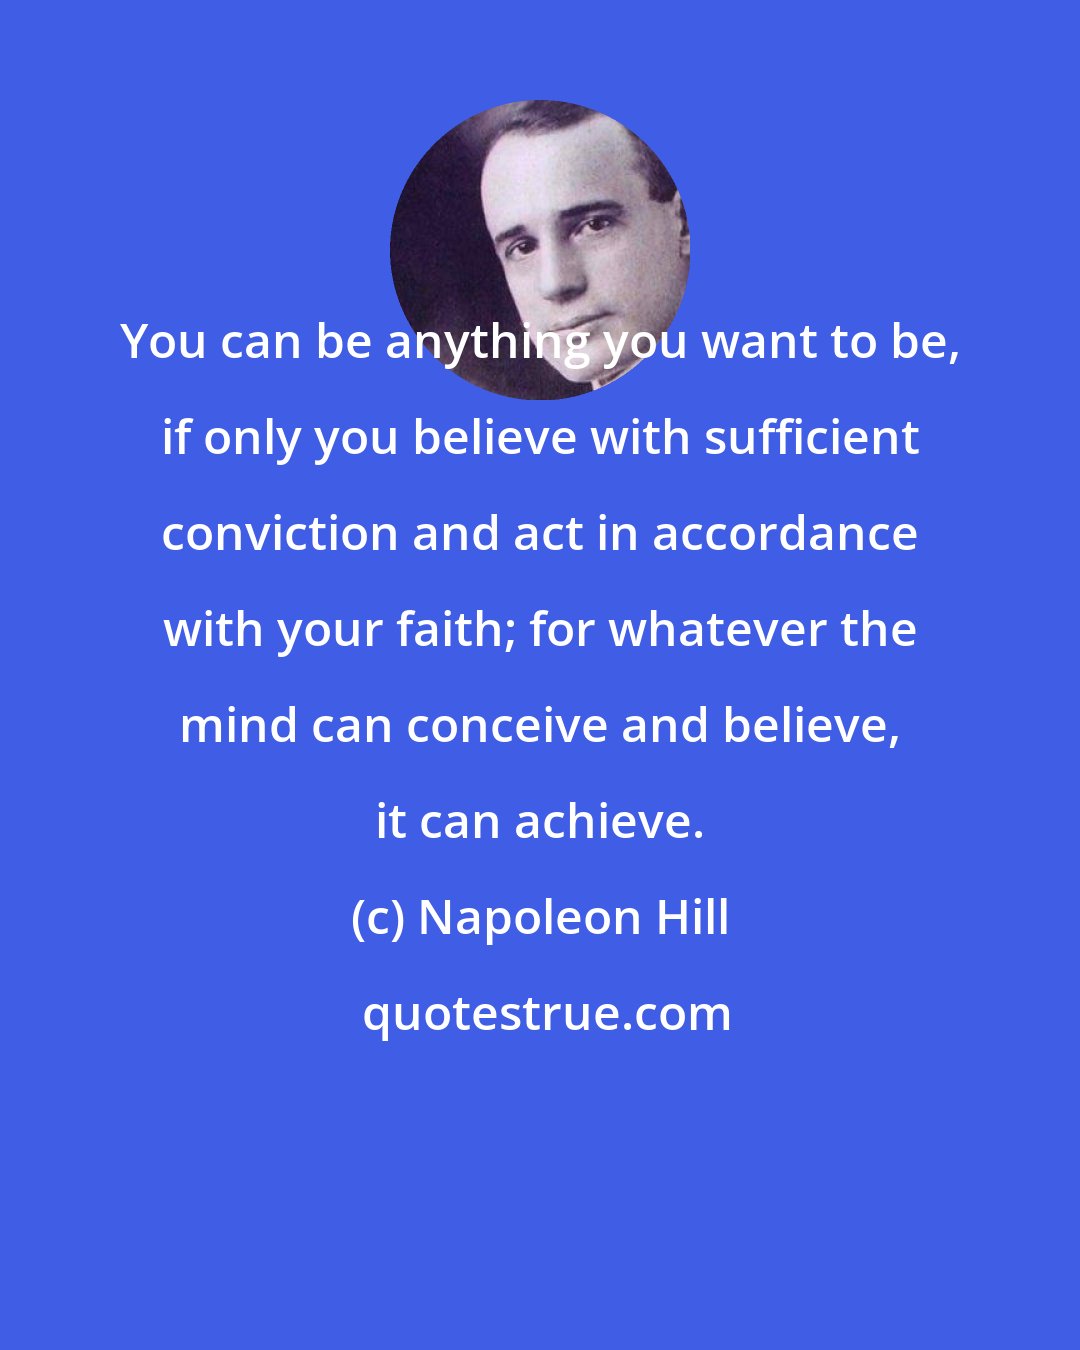 Napoleon Hill: You can be anything you want to be, if only you believe with sufficient conviction and act in accordance with your faith; for whatever the mind can conceive and believe, it can achieve.